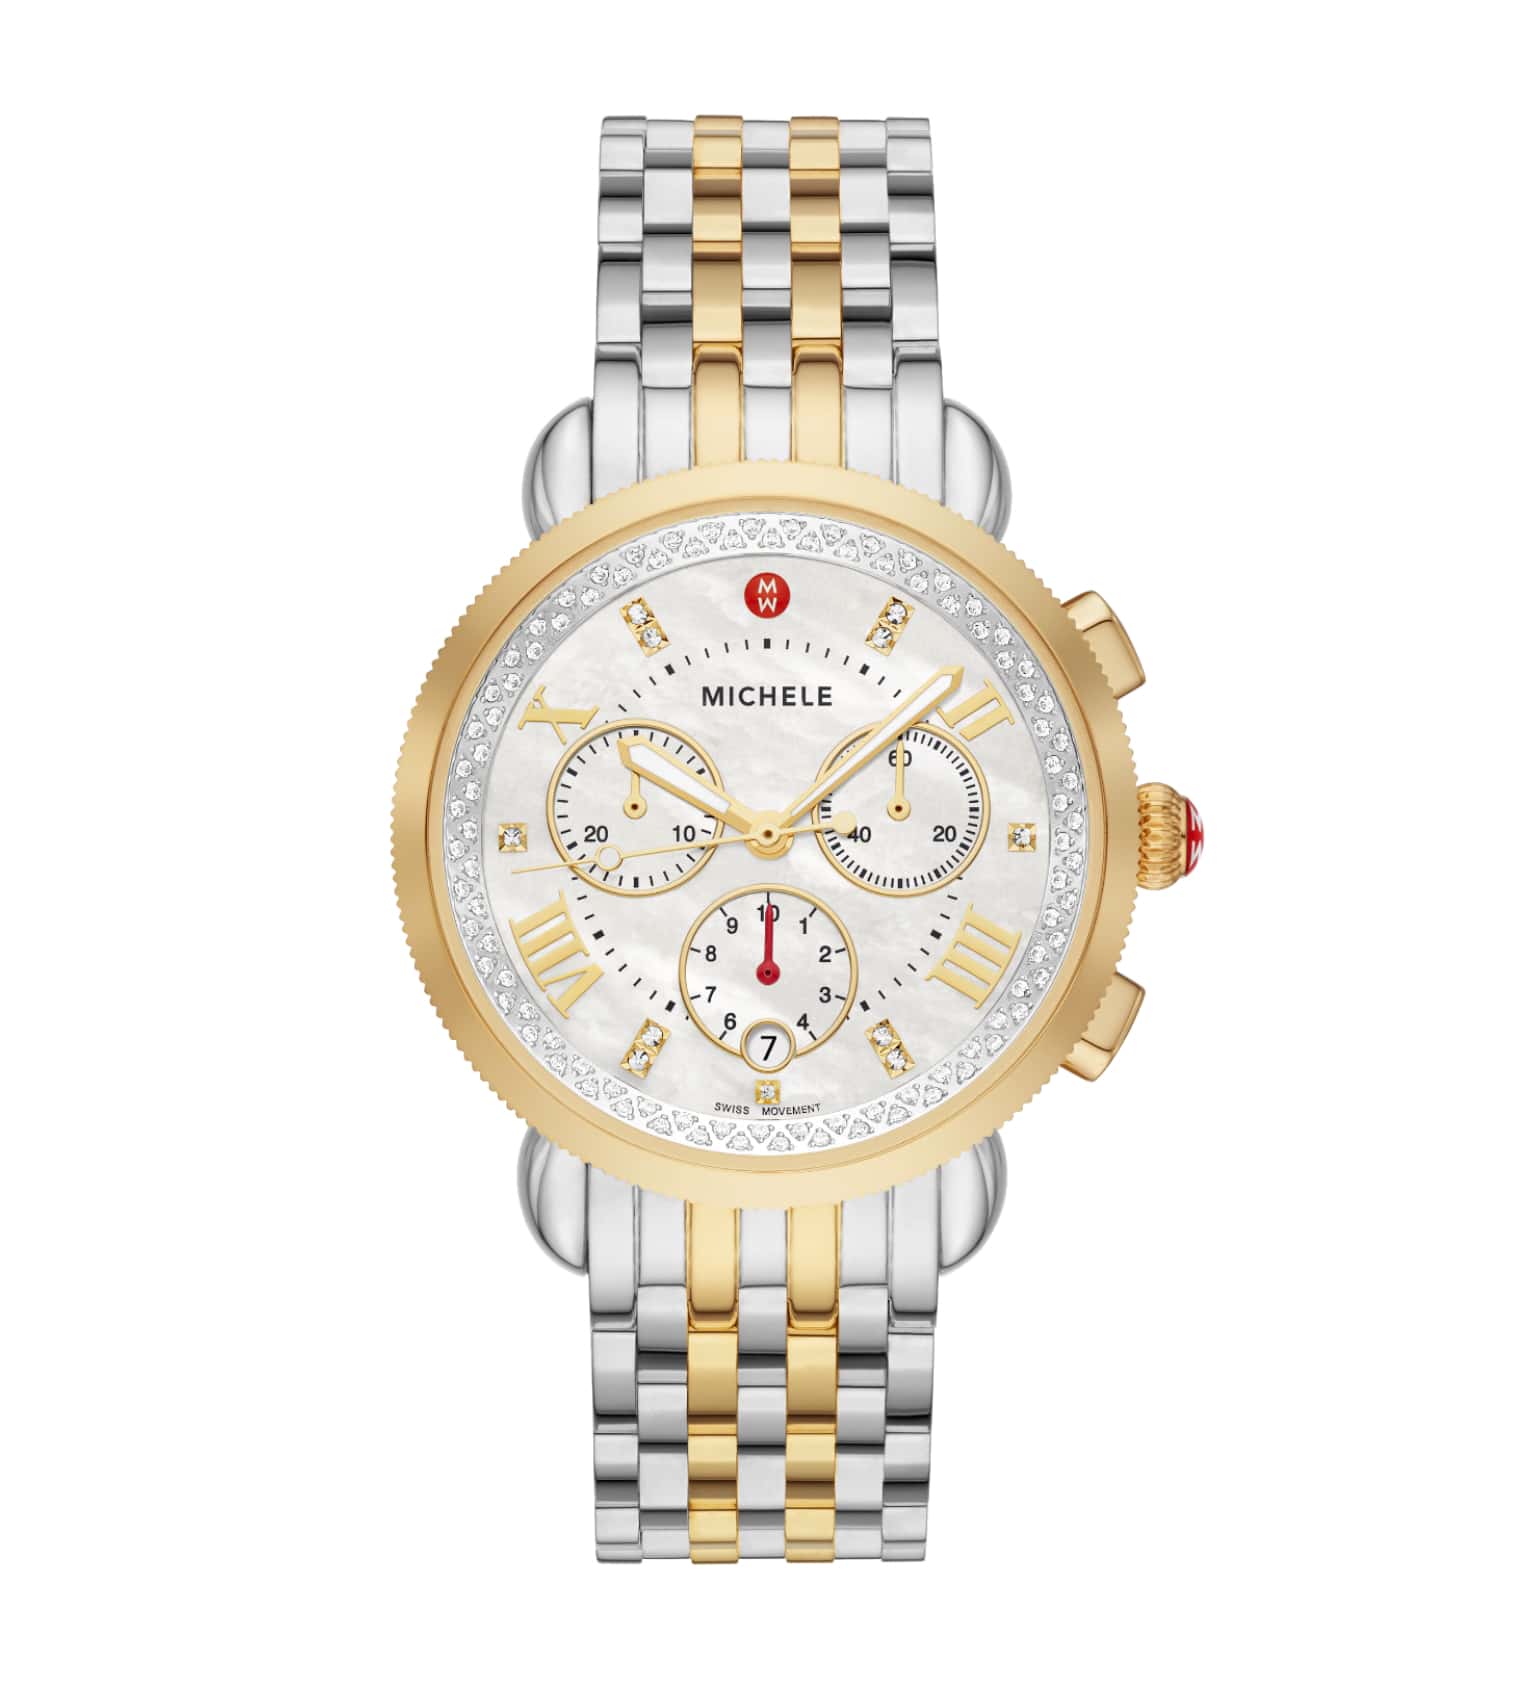 Sport Sail watch in two-tone stainless with 18K gold plating